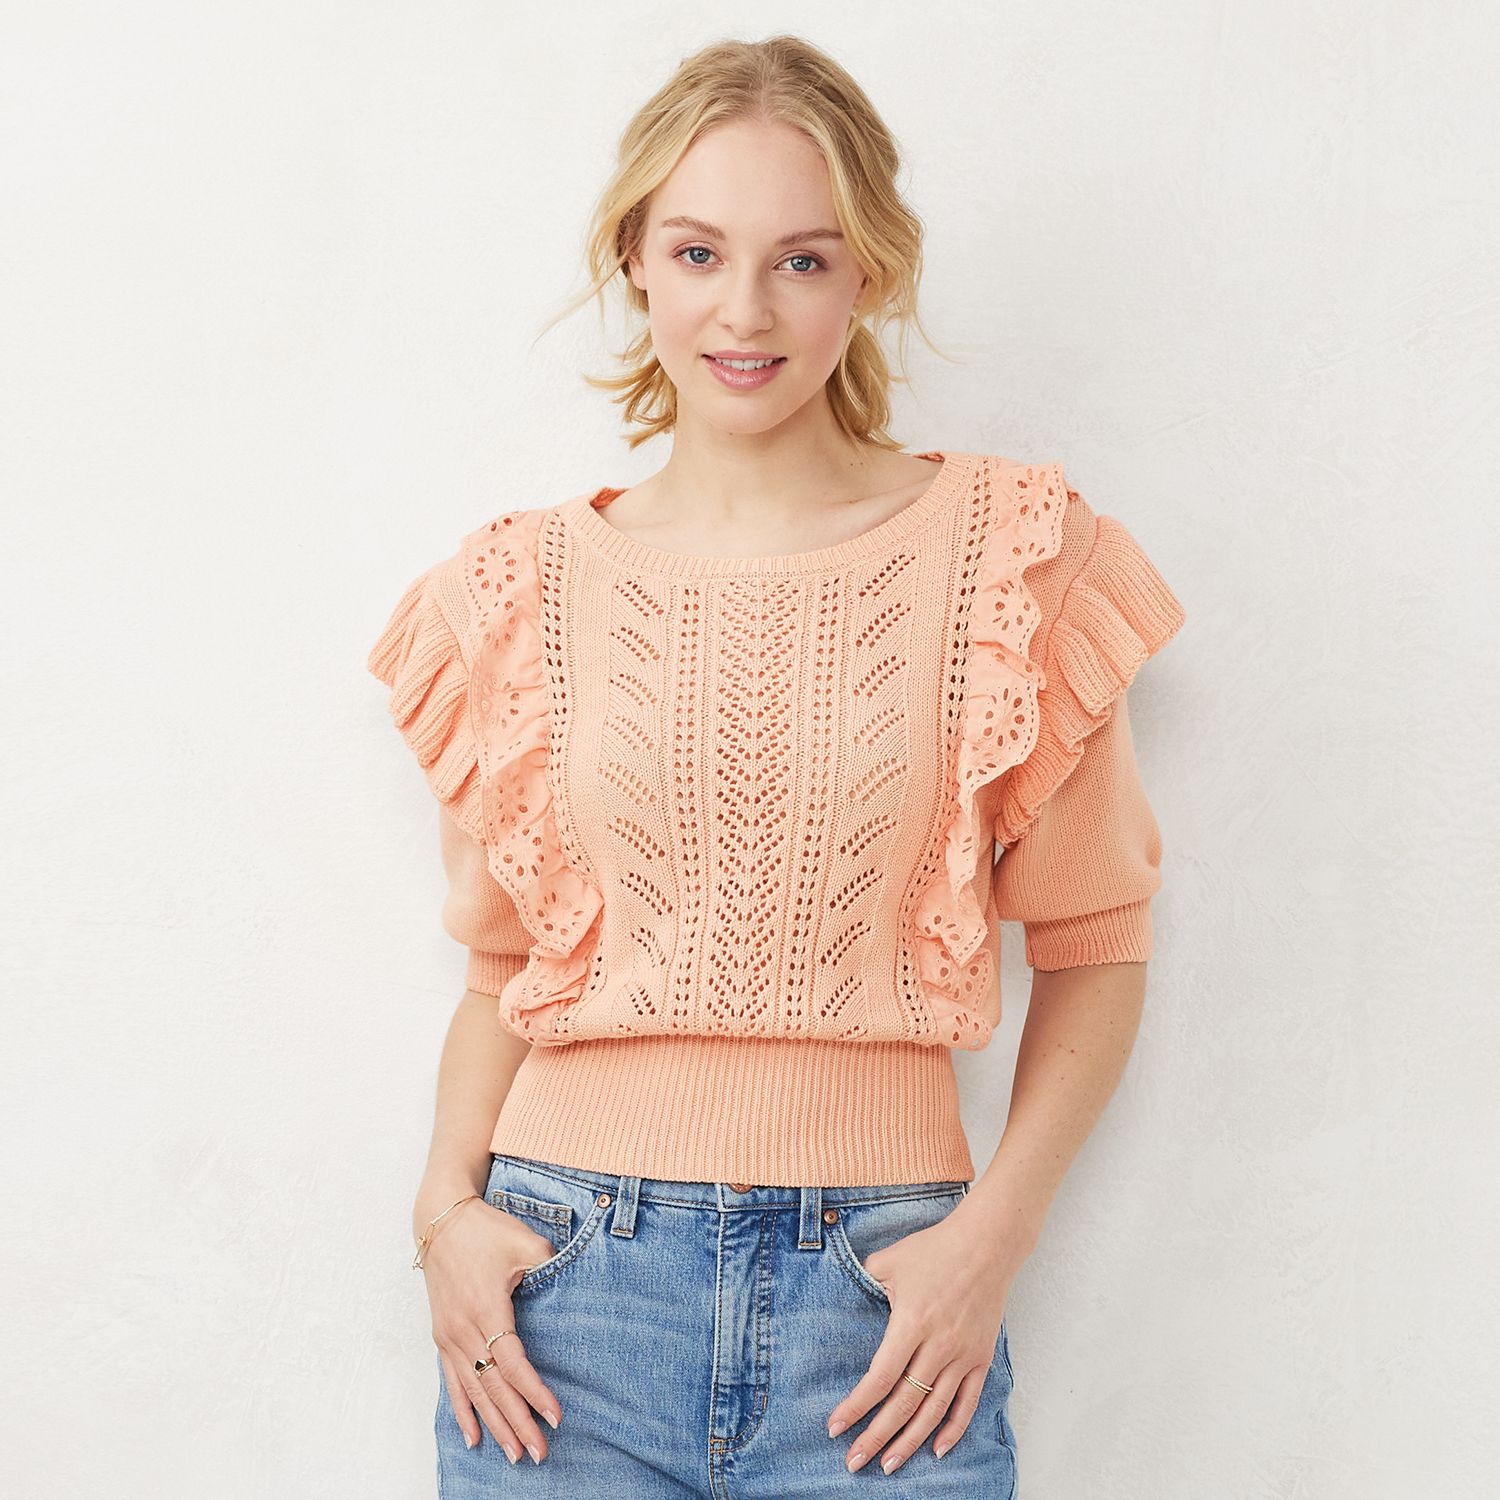 Image for LC Lauren Conrad Women's Ruffle Pointelle Sweater Top at Kohl's.